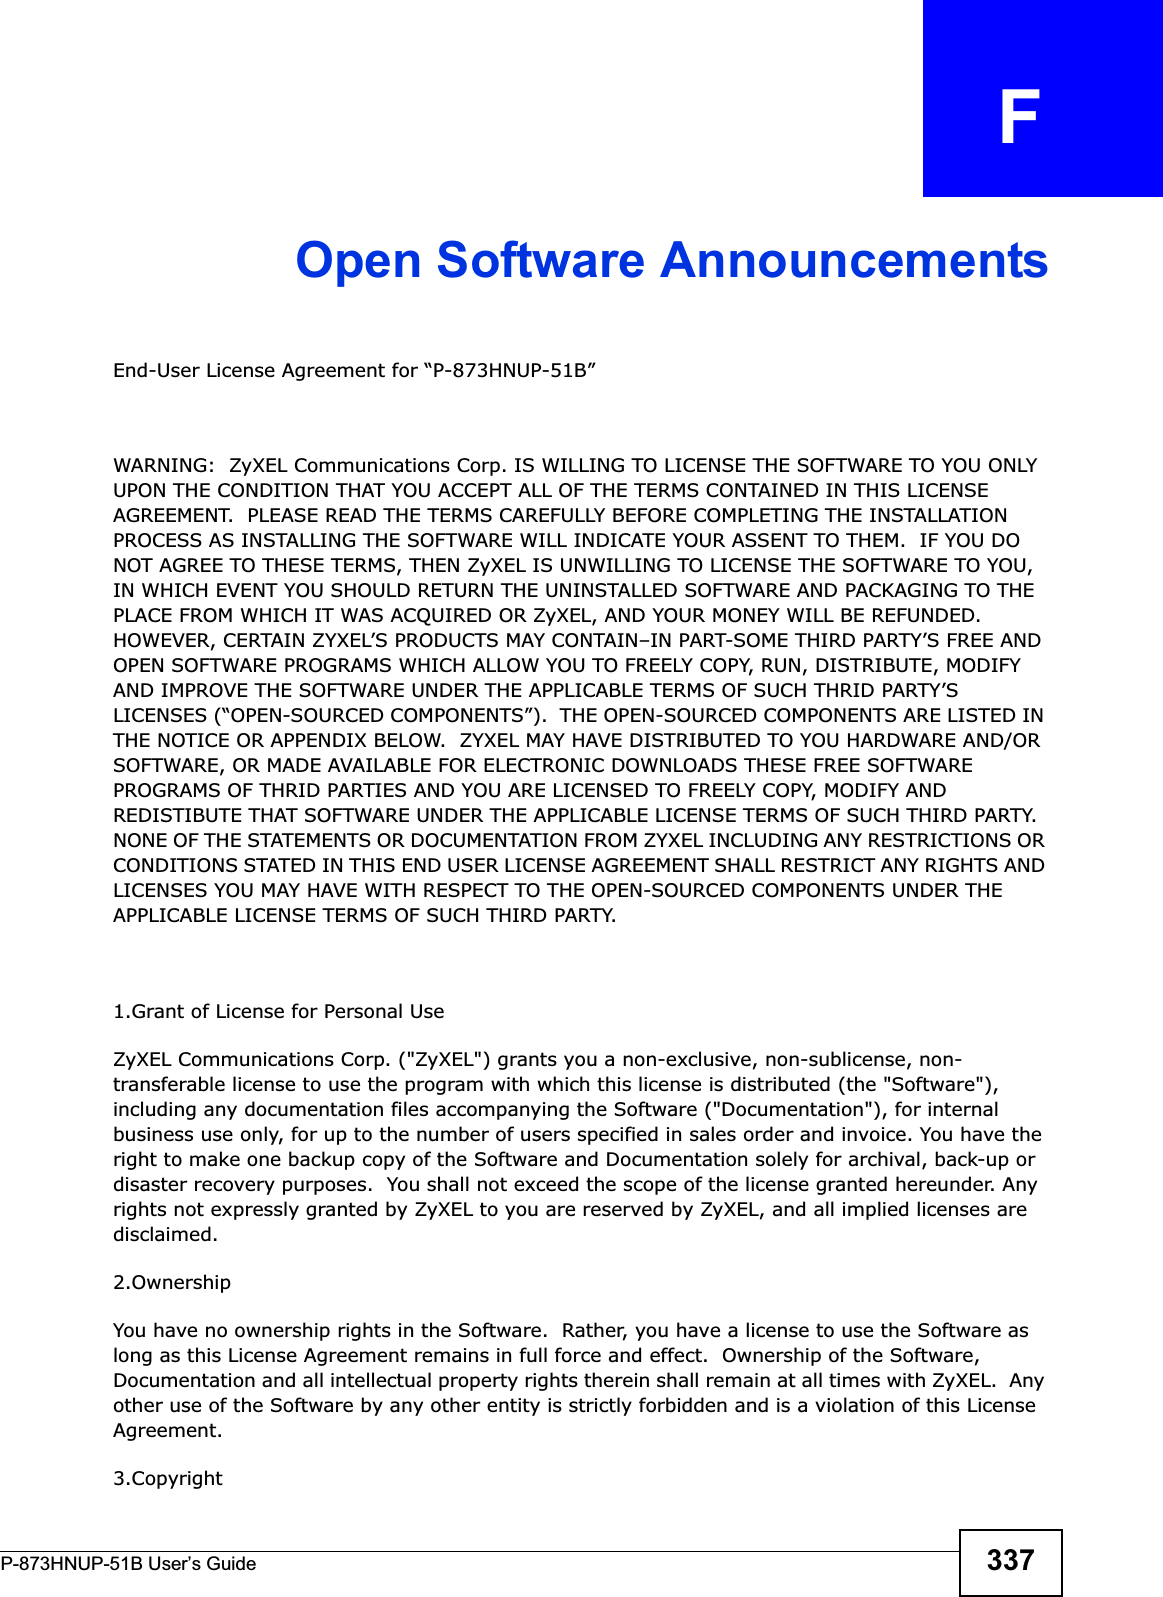 P-873HNUP-51B User’s Guide 337APPENDIX   FOpen Software AnnouncementsEnd-User License Agreement for “P-873HNUP-51B” WARNING:  ZyXEL Communications Corp. IS WILLING TO LICENSE THE SOFTWARE TO YOU ONLY UPON THE CONDITION THAT YOU ACCEPT ALL OF THE TERMS CONTAINED IN THIS LICENSE AGREEMENT.  PLEASE READ THE TERMS CAREFULLY BEFORE COMPLETING THE INSTALLATION PROCESS AS INSTALLING THE SOFTWARE WILL INDICATE YOUR ASSENT TO THEM.  IF YOU DO NOT AGREE TO THESE TERMS, THEN ZyXEL IS UNWILLING TO LICENSE THE SOFTWARE TO YOU, IN WHICH EVENT YOU SHOULD RETURN THE UNINSTALLED SOFTWARE AND PACKAGING TO THE PLACE FROM WHICH IT WAS ACQUIRED OR ZyXEL, AND YOUR MONEY WILL BE REFUNDED.   HOWEVER, CERTAIN ZYXEL’S PRODUCTS MAY CONTAIN–IN PART-SOME THIRD PARTY’S FREE AND OPEN SOFTWARE PROGRAMS WHICH ALLOW YOU TO FREELY COPY, RUN, DISTRIBUTE, MODIFY AND IMPROVE THE SOFTWARE UNDER THE APPLICABLE TERMS OF SUCH THRID PARTY’S LICENSES (“OPEN-SOURCED COMPONENTS”).  THE OPEN-SOURCED COMPONENTS ARE LISTED IN THE NOTICE OR APPENDIX BELOW.  ZYXEL MAY HAVE DISTRIBUTED TO YOU HARDWARE AND/OR SOFTWARE, OR MADE AVAILABLE FOR ELECTRONIC DOWNLOADS THESE FREE SOFTWARE PROGRAMS OF THRID PARTIES AND YOU ARE LICENSED TO FREELY COPY, MODIFY AND REDISTIBUTE THAT SOFTWARE UNDER THE APPLICABLE LICENSE TERMS OF SUCH THIRD PARTY.  NONE OF THE STATEMENTS OR DOCUMENTATION FROM ZYXEL INCLUDING ANY RESTRICTIONS OR CONDITIONS STATED IN THIS END USER LICENSE AGREEMENT SHALL RESTRICT ANY RIGHTS AND LICENSES YOU MAY HAVE WITH RESPECT TO THE OPEN-SOURCED COMPONENTS UNDER THE APPLICABLE LICENSE TERMS OF SUCH THIRD PARTY.   1.Grant of License for Personal UseZyXEL Communications Corp. (&quot;ZyXEL&quot;) grants you a non-exclusive, non-sublicense, non-transferable license to use the program with which this license is distributed (the &quot;Software&quot;), including any documentation files accompanying the Software (&quot;Documentation&quot;), for internal business use only, for up to the number of users specified in sales order and invoice. You have the right to make one backup copy of the Software and Documentation solely for archival, back-up or disaster recovery purposes.  You shall not exceed the scope of the license granted hereunder. Any rights not expressly granted by ZyXEL to you are reserved by ZyXEL, and all implied licenses are disclaimed.2.OwnershipYou have no ownership rights in the Software.  Rather, you have a license to use the Software as long as this License Agreement remains in full force and effect.  Ownership of the Software, Documentation and all intellectual property rights therein shall remain at all times with ZyXEL.  Any other use of the Software by any other entity is strictly forbidden and is a violation of this License Agreement.3.Copyright